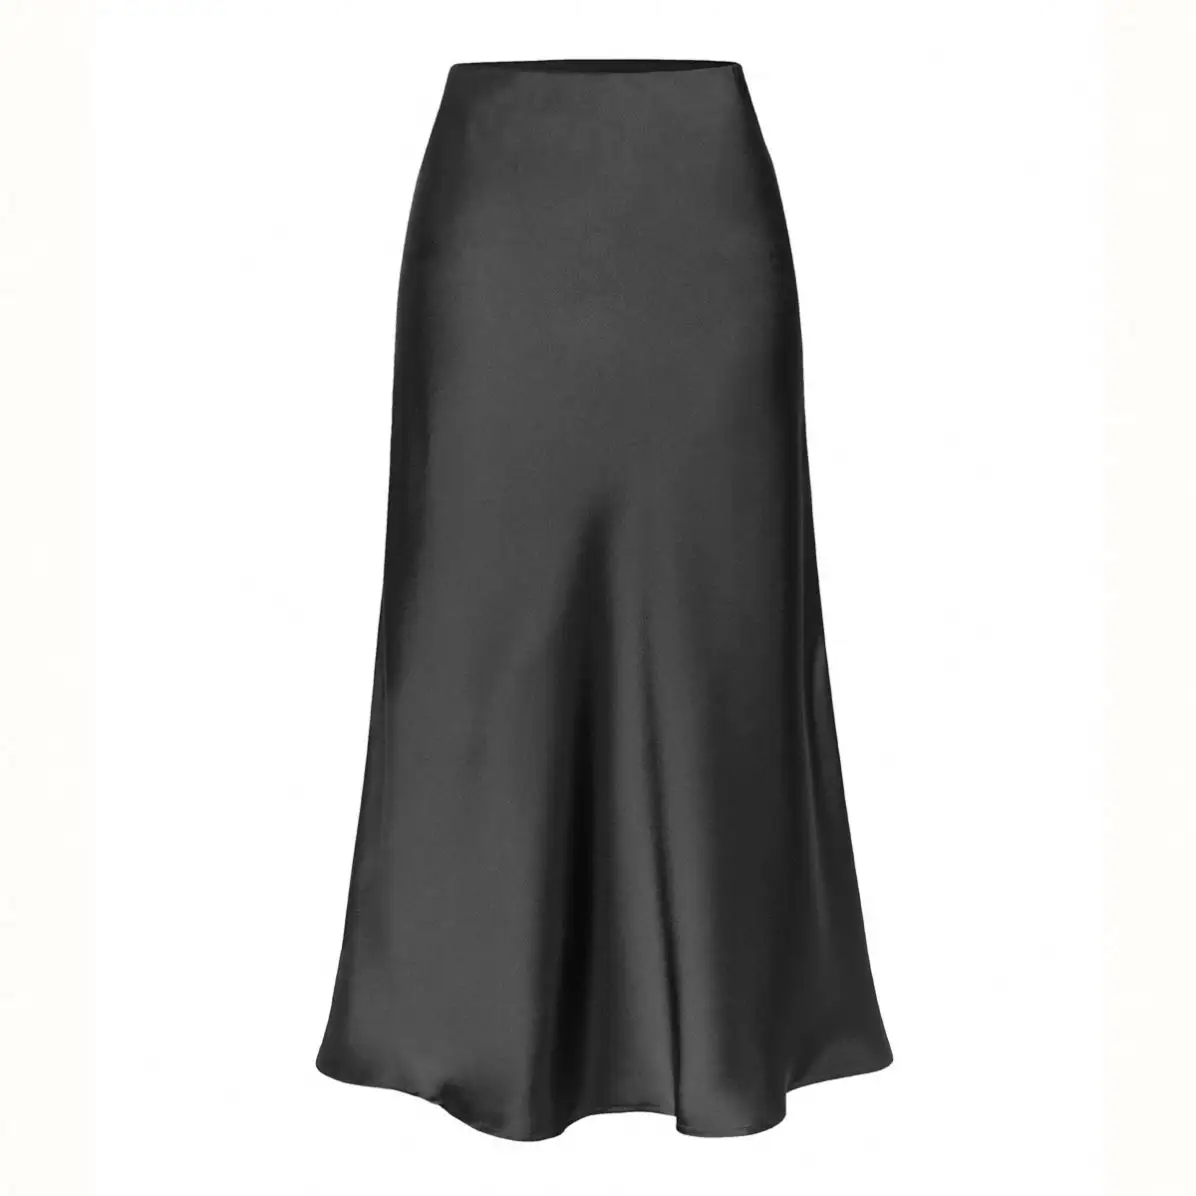 Wholesale Thick Satin Skirts Fashionable Women Solid Color Skirts Navy Black Colors Available